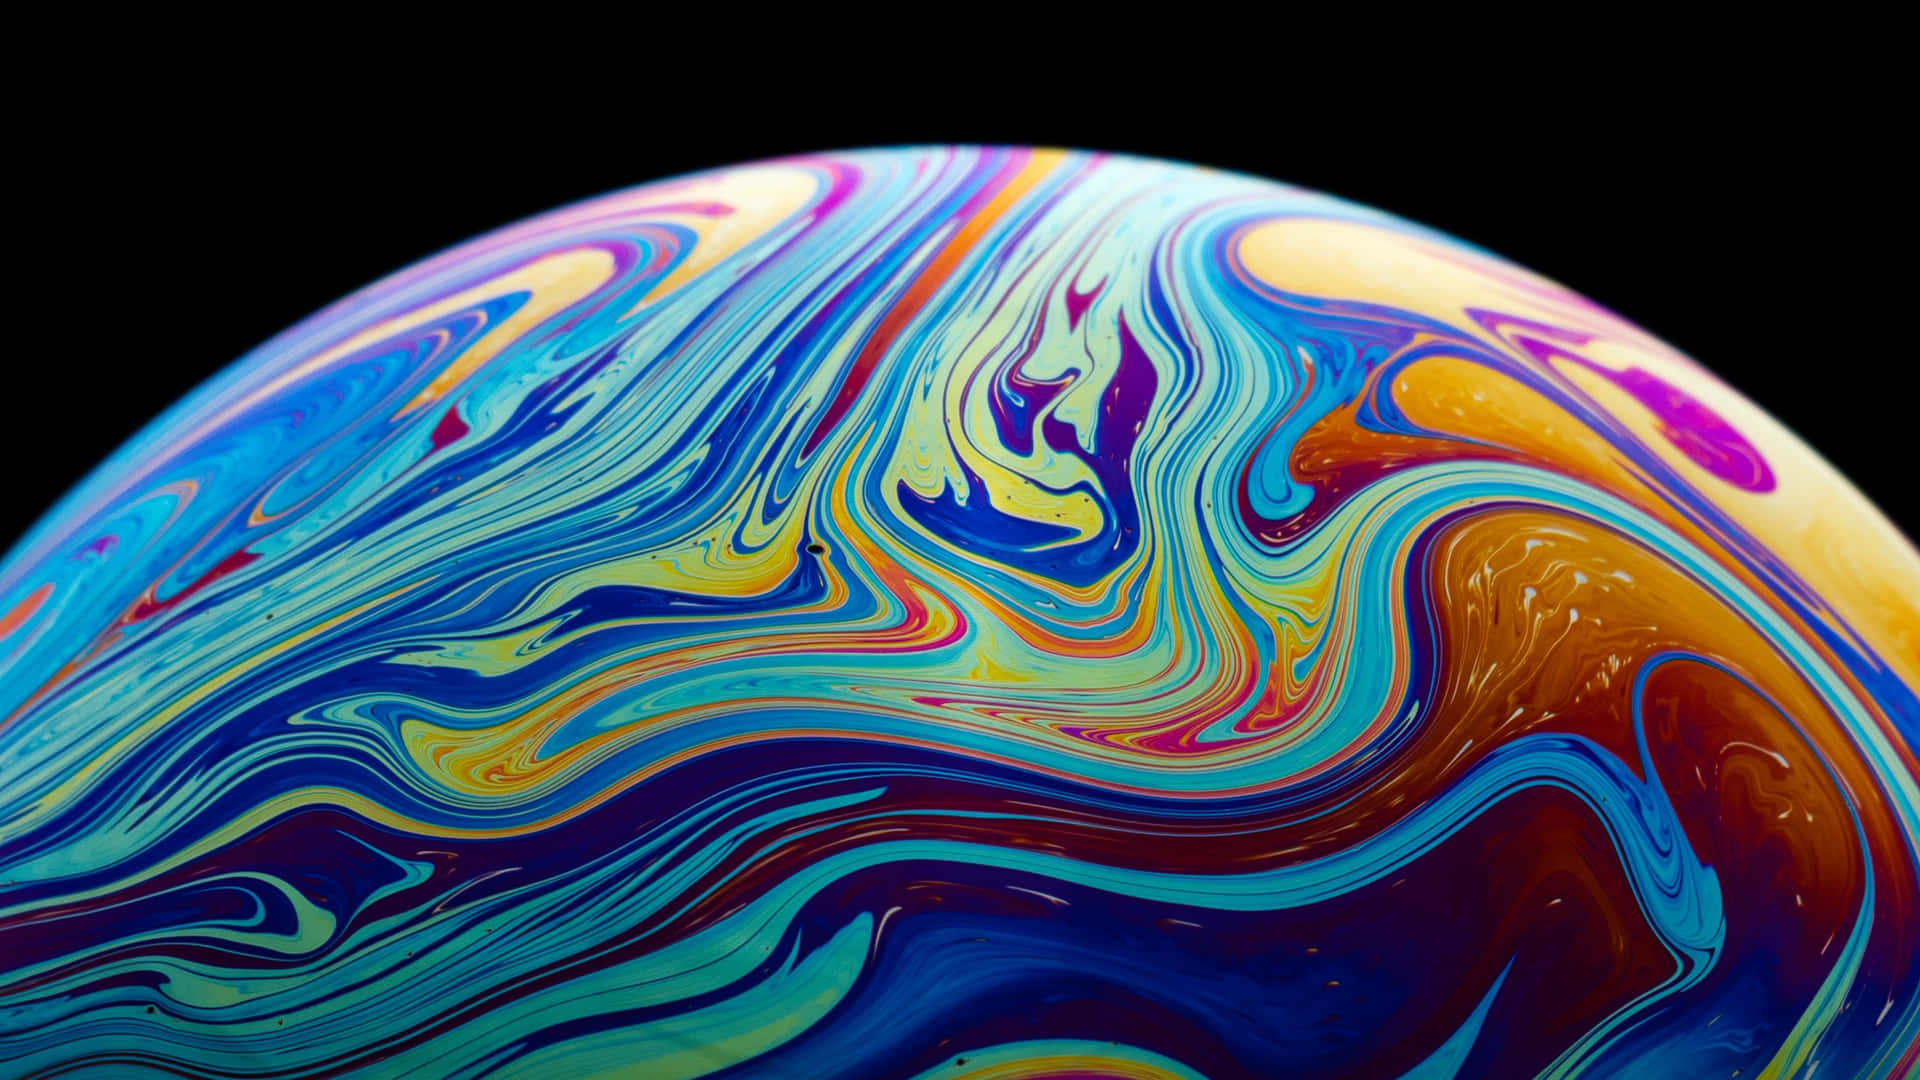 An Apple Iphone X With Colorful Swirls On It